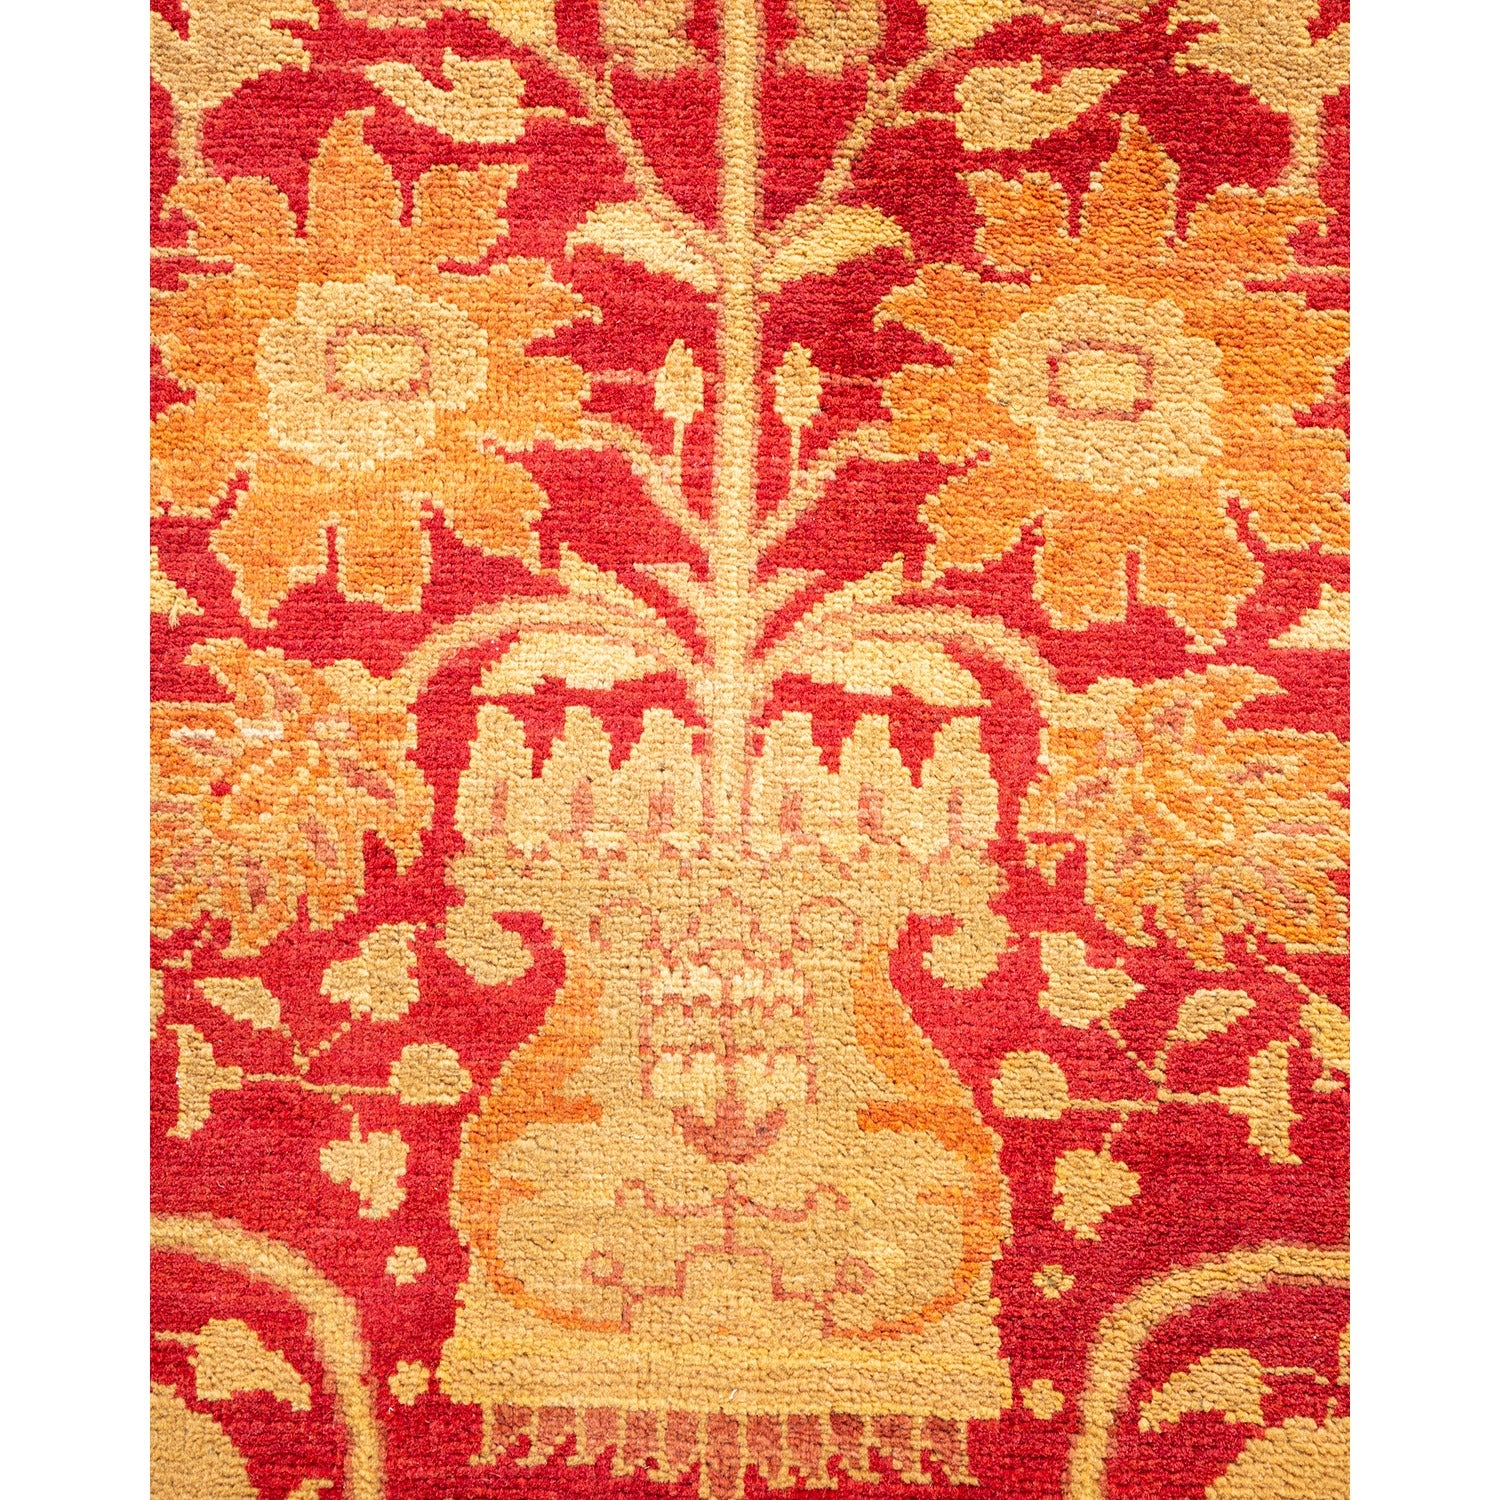 Intricate handcrafted rug with warm floral motifs in red and cream.